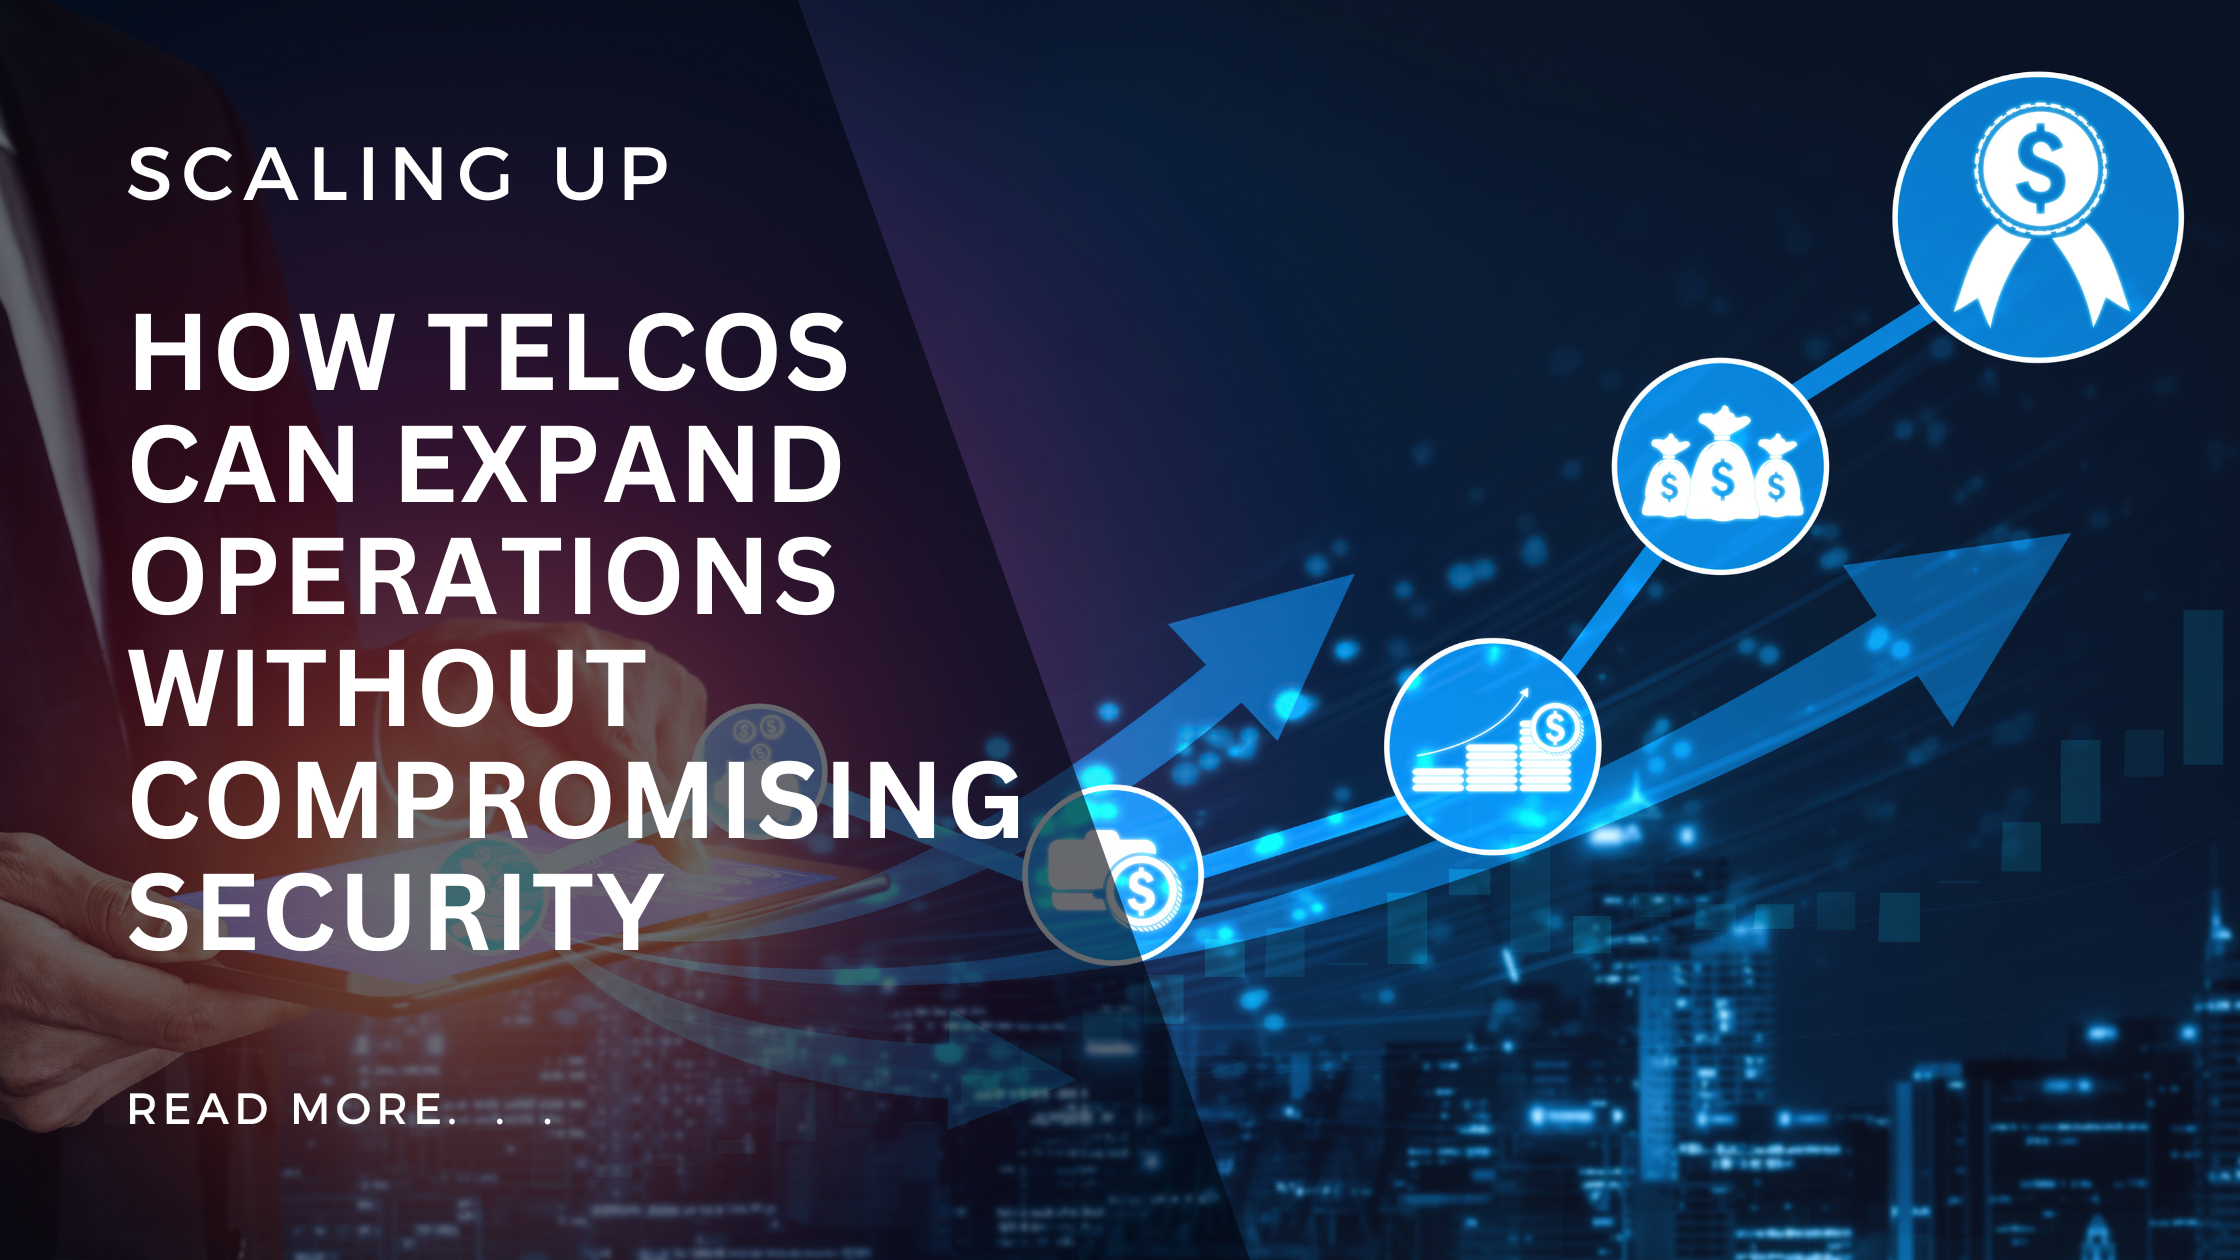 Scaling Up: How Telcos Can Expand Operations Without Compromising Security